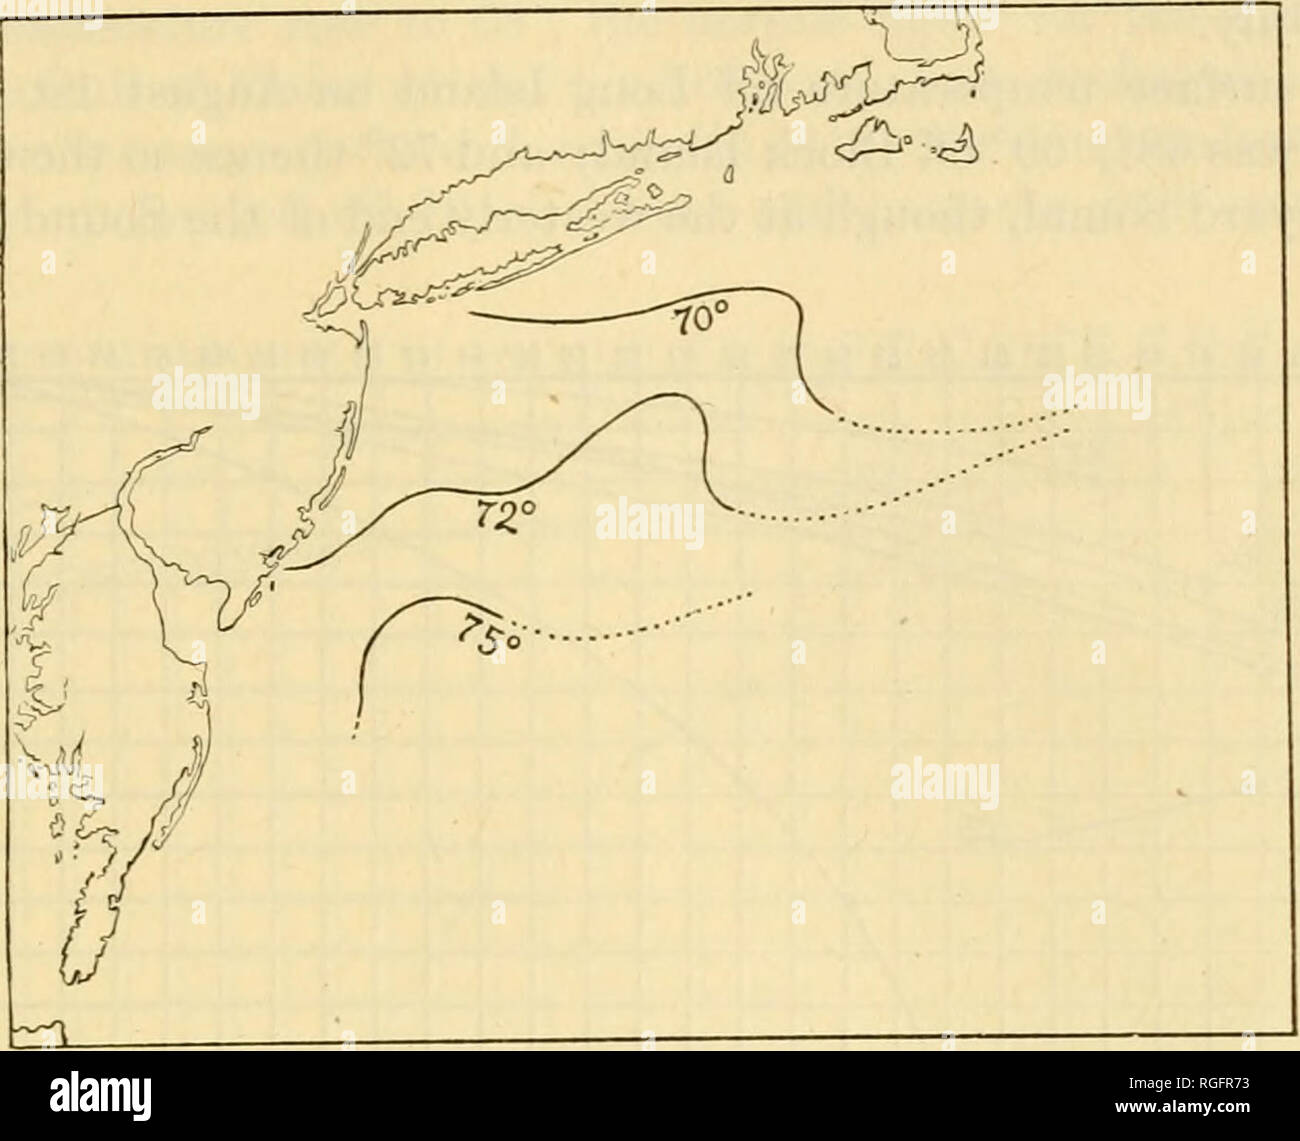 . Bulletin of the Museum of Comparative Zoology at Harvard College. Zoology. BIGELOW: COAST WATER EXPLORATION OF 1913. 157. Fig. 2.â Surface temperature south of Cape Cod, Aug. 20-Sept. 1. 5 to 15 20 25 30 35 40 45 50 55 60 65 70 75 80 85 40Â° 41 45 4 4^ 4 5 46 4 7 4 3 49 50 &quot; 5 5 2 53 54 55 5 B 5 7 58 59 60Â° 61 6 2 83 64 65 66 6 7 68 6S â r ^ ^ -:: ==J ^- -:^ ^ == '-- =^ ^ ^ ^^ ^ ^ / ^ â ^ ^ â ^ / ^ / / 60 / / 5 9 1 62  s 5 8    ^ 61  j Fig. 3.â Temperatiu-e sections in tlae southern part of the Gulf of Maine (Station 10058); on George's Bank (Station 10059), and on the continental Stock Photo